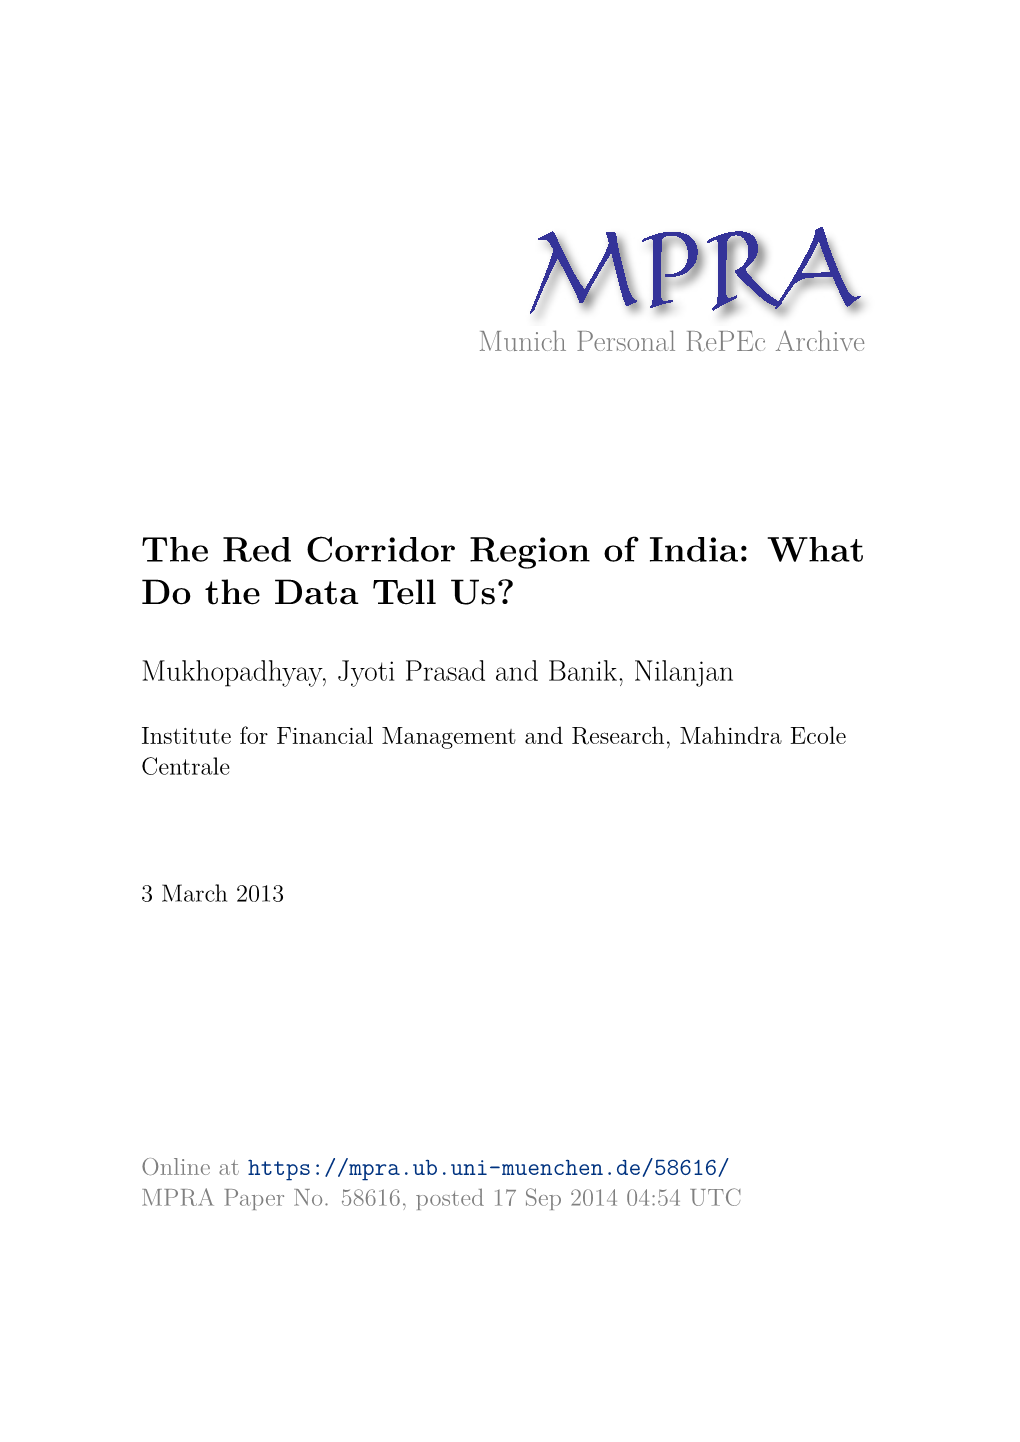 The Red Corridor Region of India: What Do the Data Tell Us?